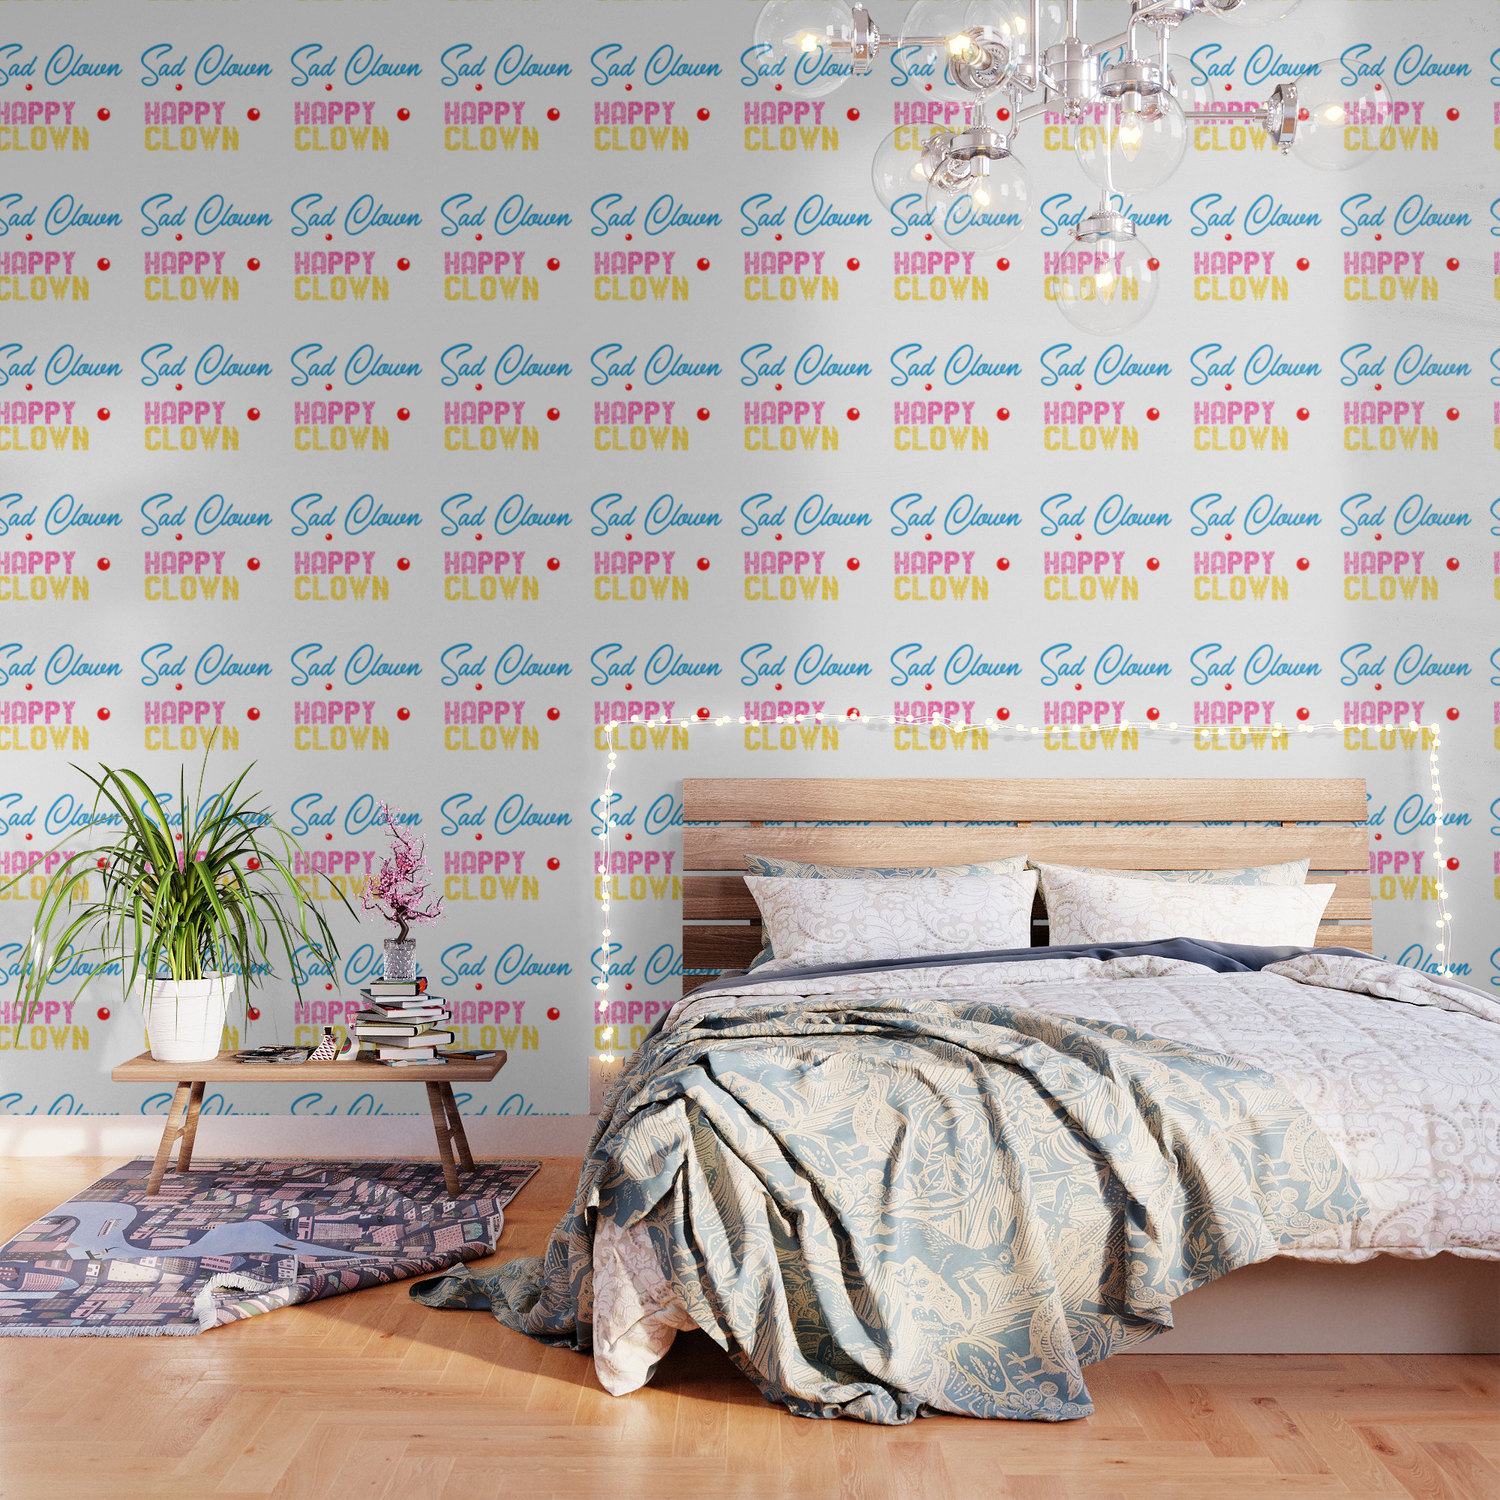 Dont be a sad clown. Be a happy clown Wallpaper by Lin Watchorn | Society6